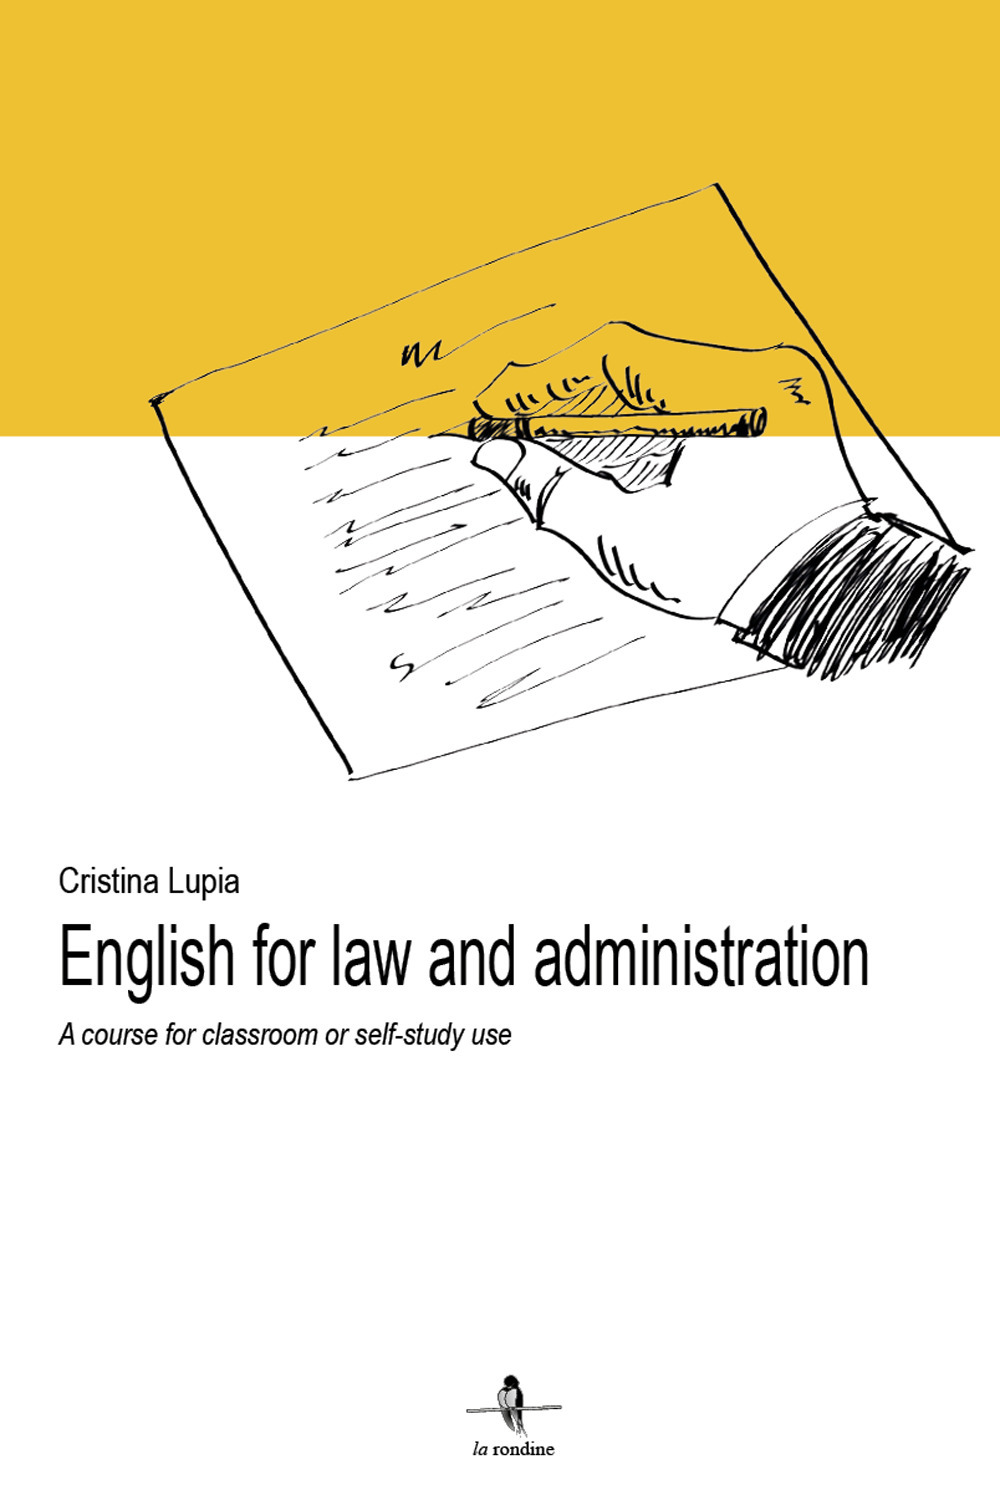 English for law and administration. A course for classroom or self-study use